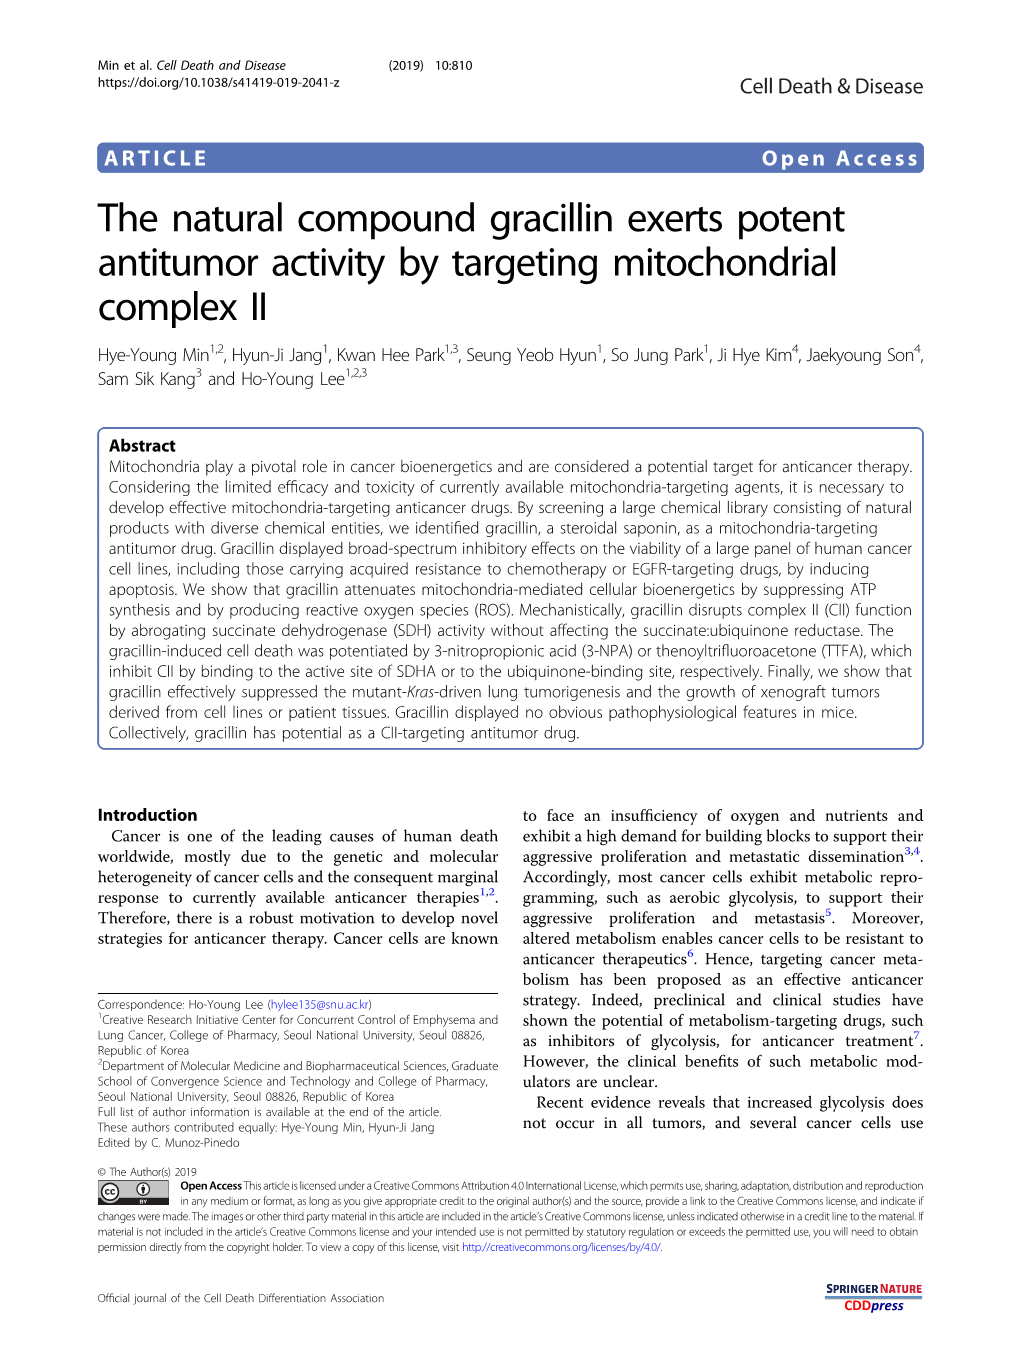 The Natural Compound Gracillin Exerts Potent Antitumor Activity by Targeting